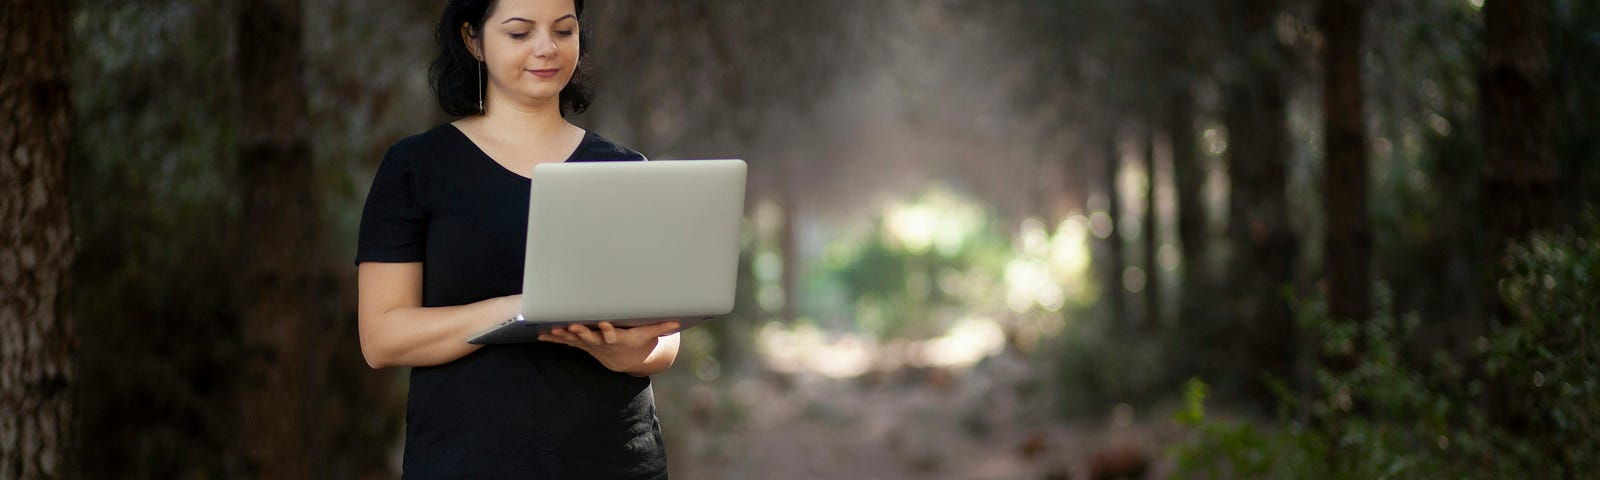 A freelance writer stand in a foggy forest with her laptop open